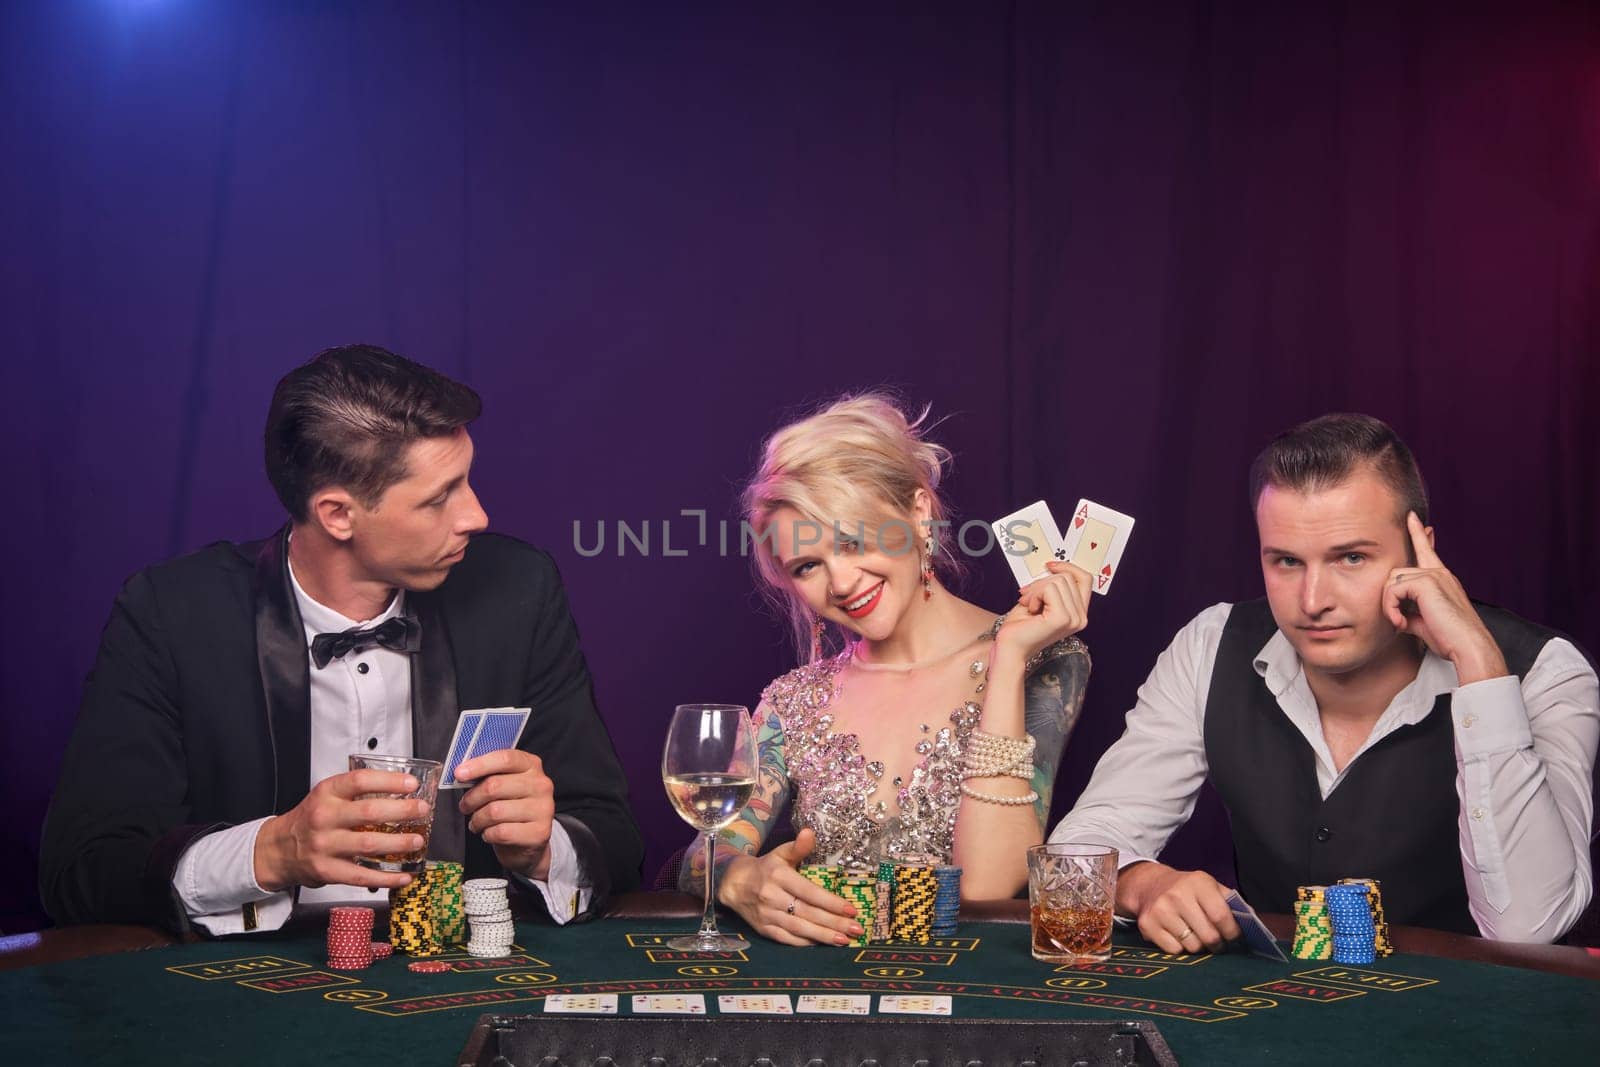 Two stylish men and cute woman are playing poker at casino. Youth are making bets waiting for a big win. They are smiling and posing sitting at the table against a red and blue backlights on black smoke background. Cards, chips, money, gambling, entertainment concept.